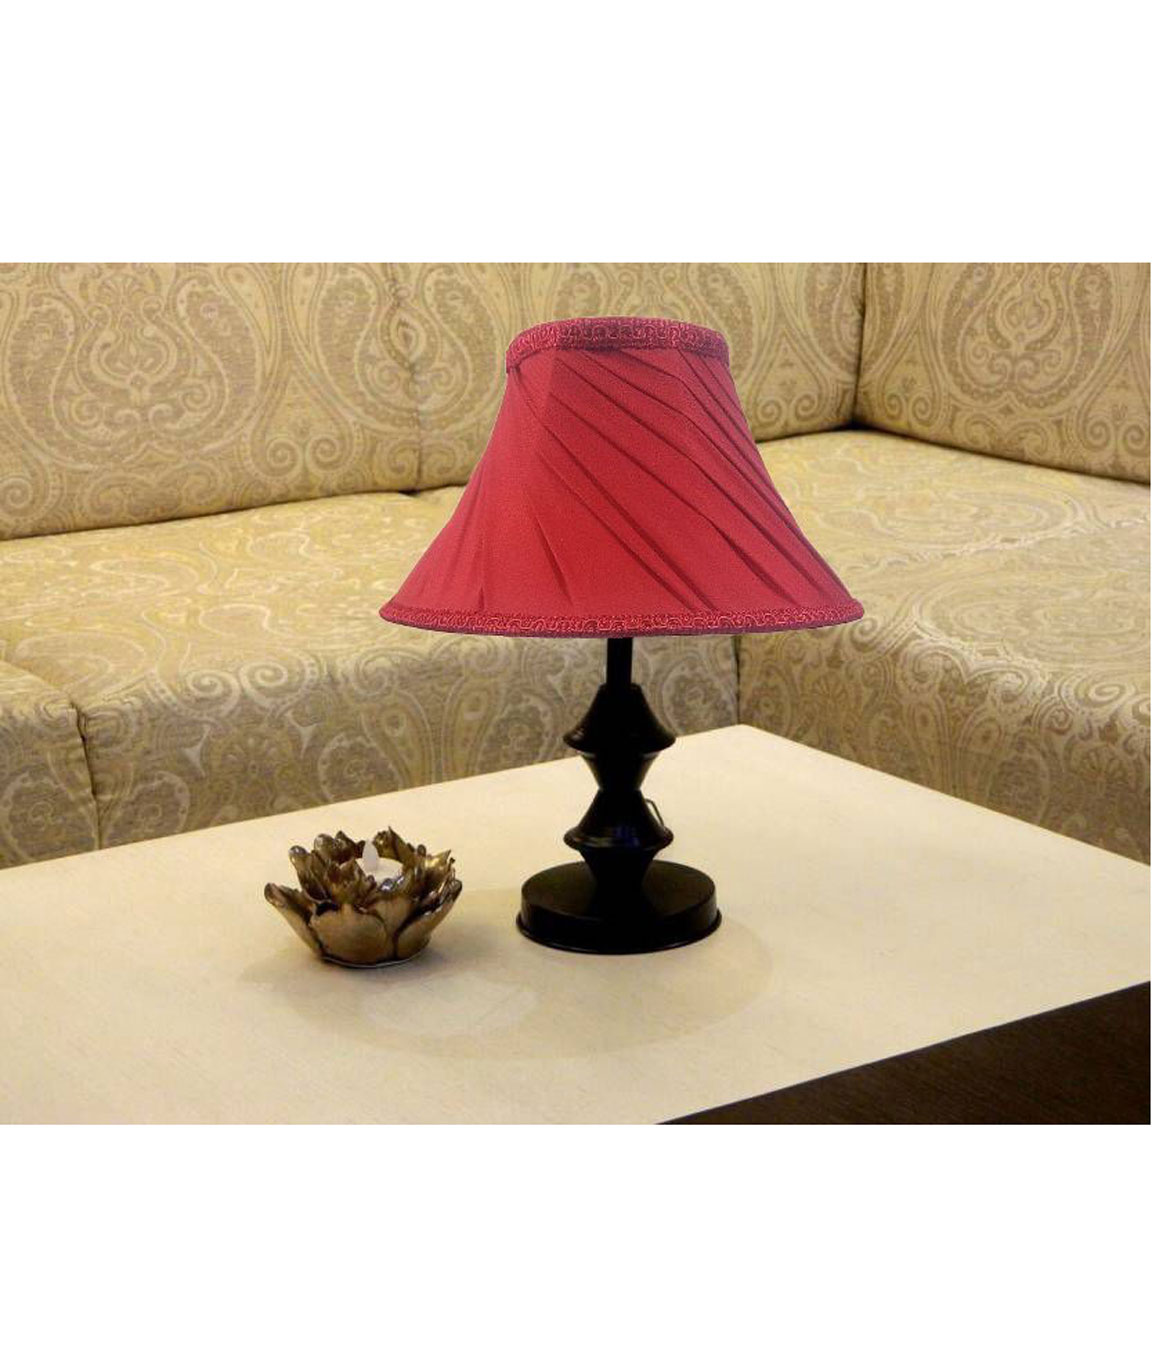 RDC Black Double Ring Stand Table Lamp with 10 Inches Round Slanting Pleated Red with Lace Border Lamp Shade